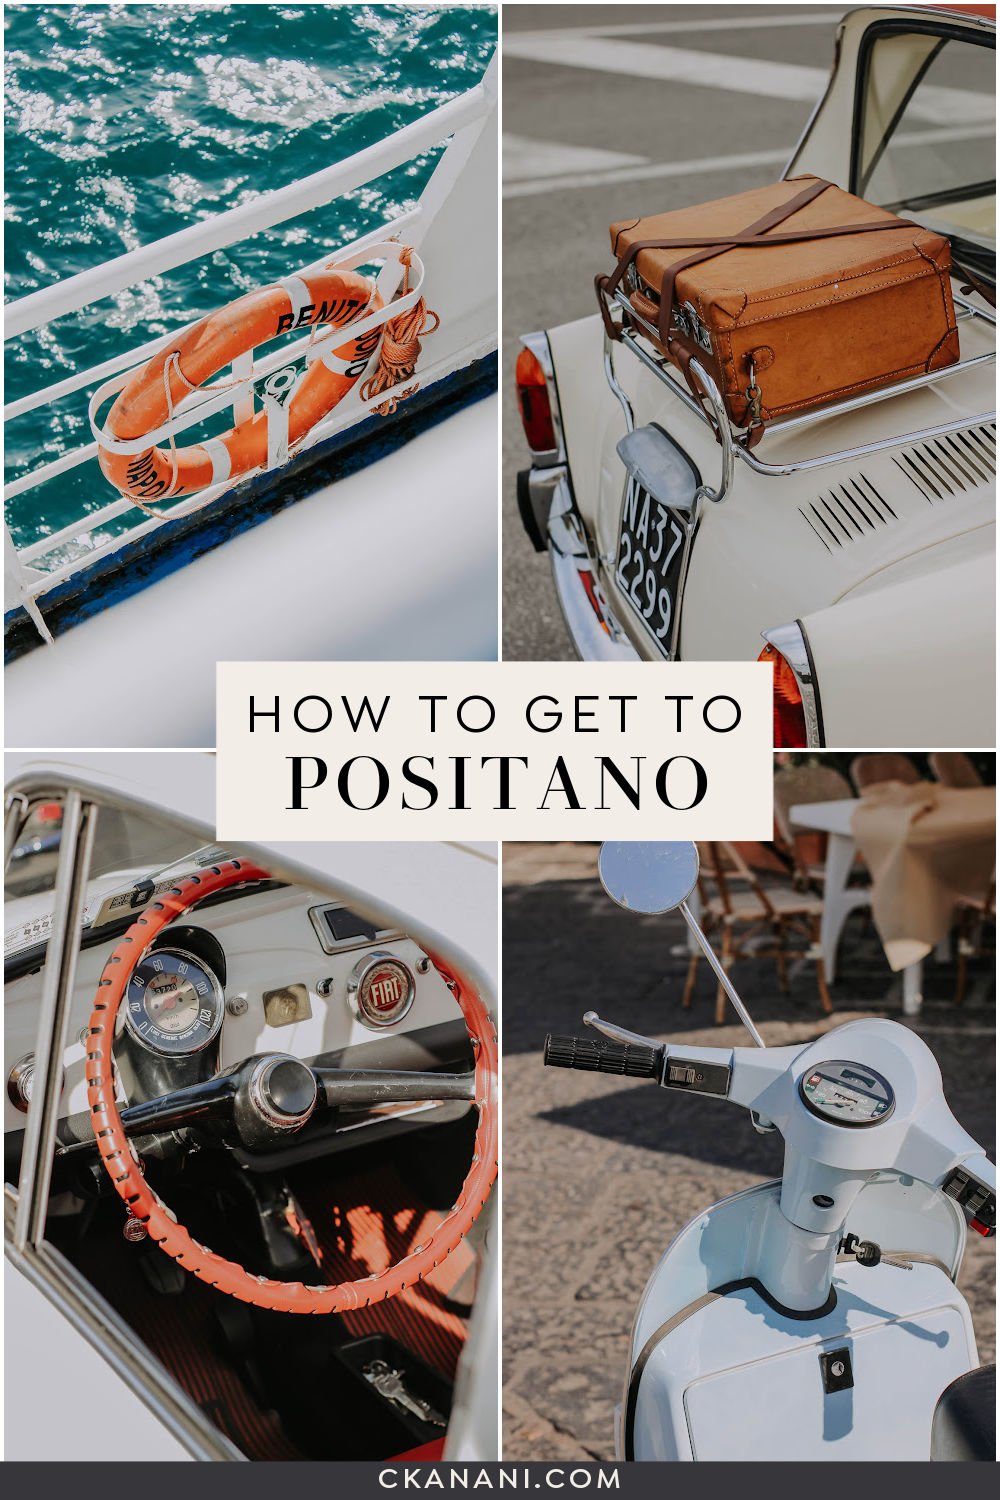 A detailed guide on how to get to Positano Italy. From Rome to Positano, from Naples to Positano, from Sorrento to Positano, and more. Positano travel guide, Positano itinerary